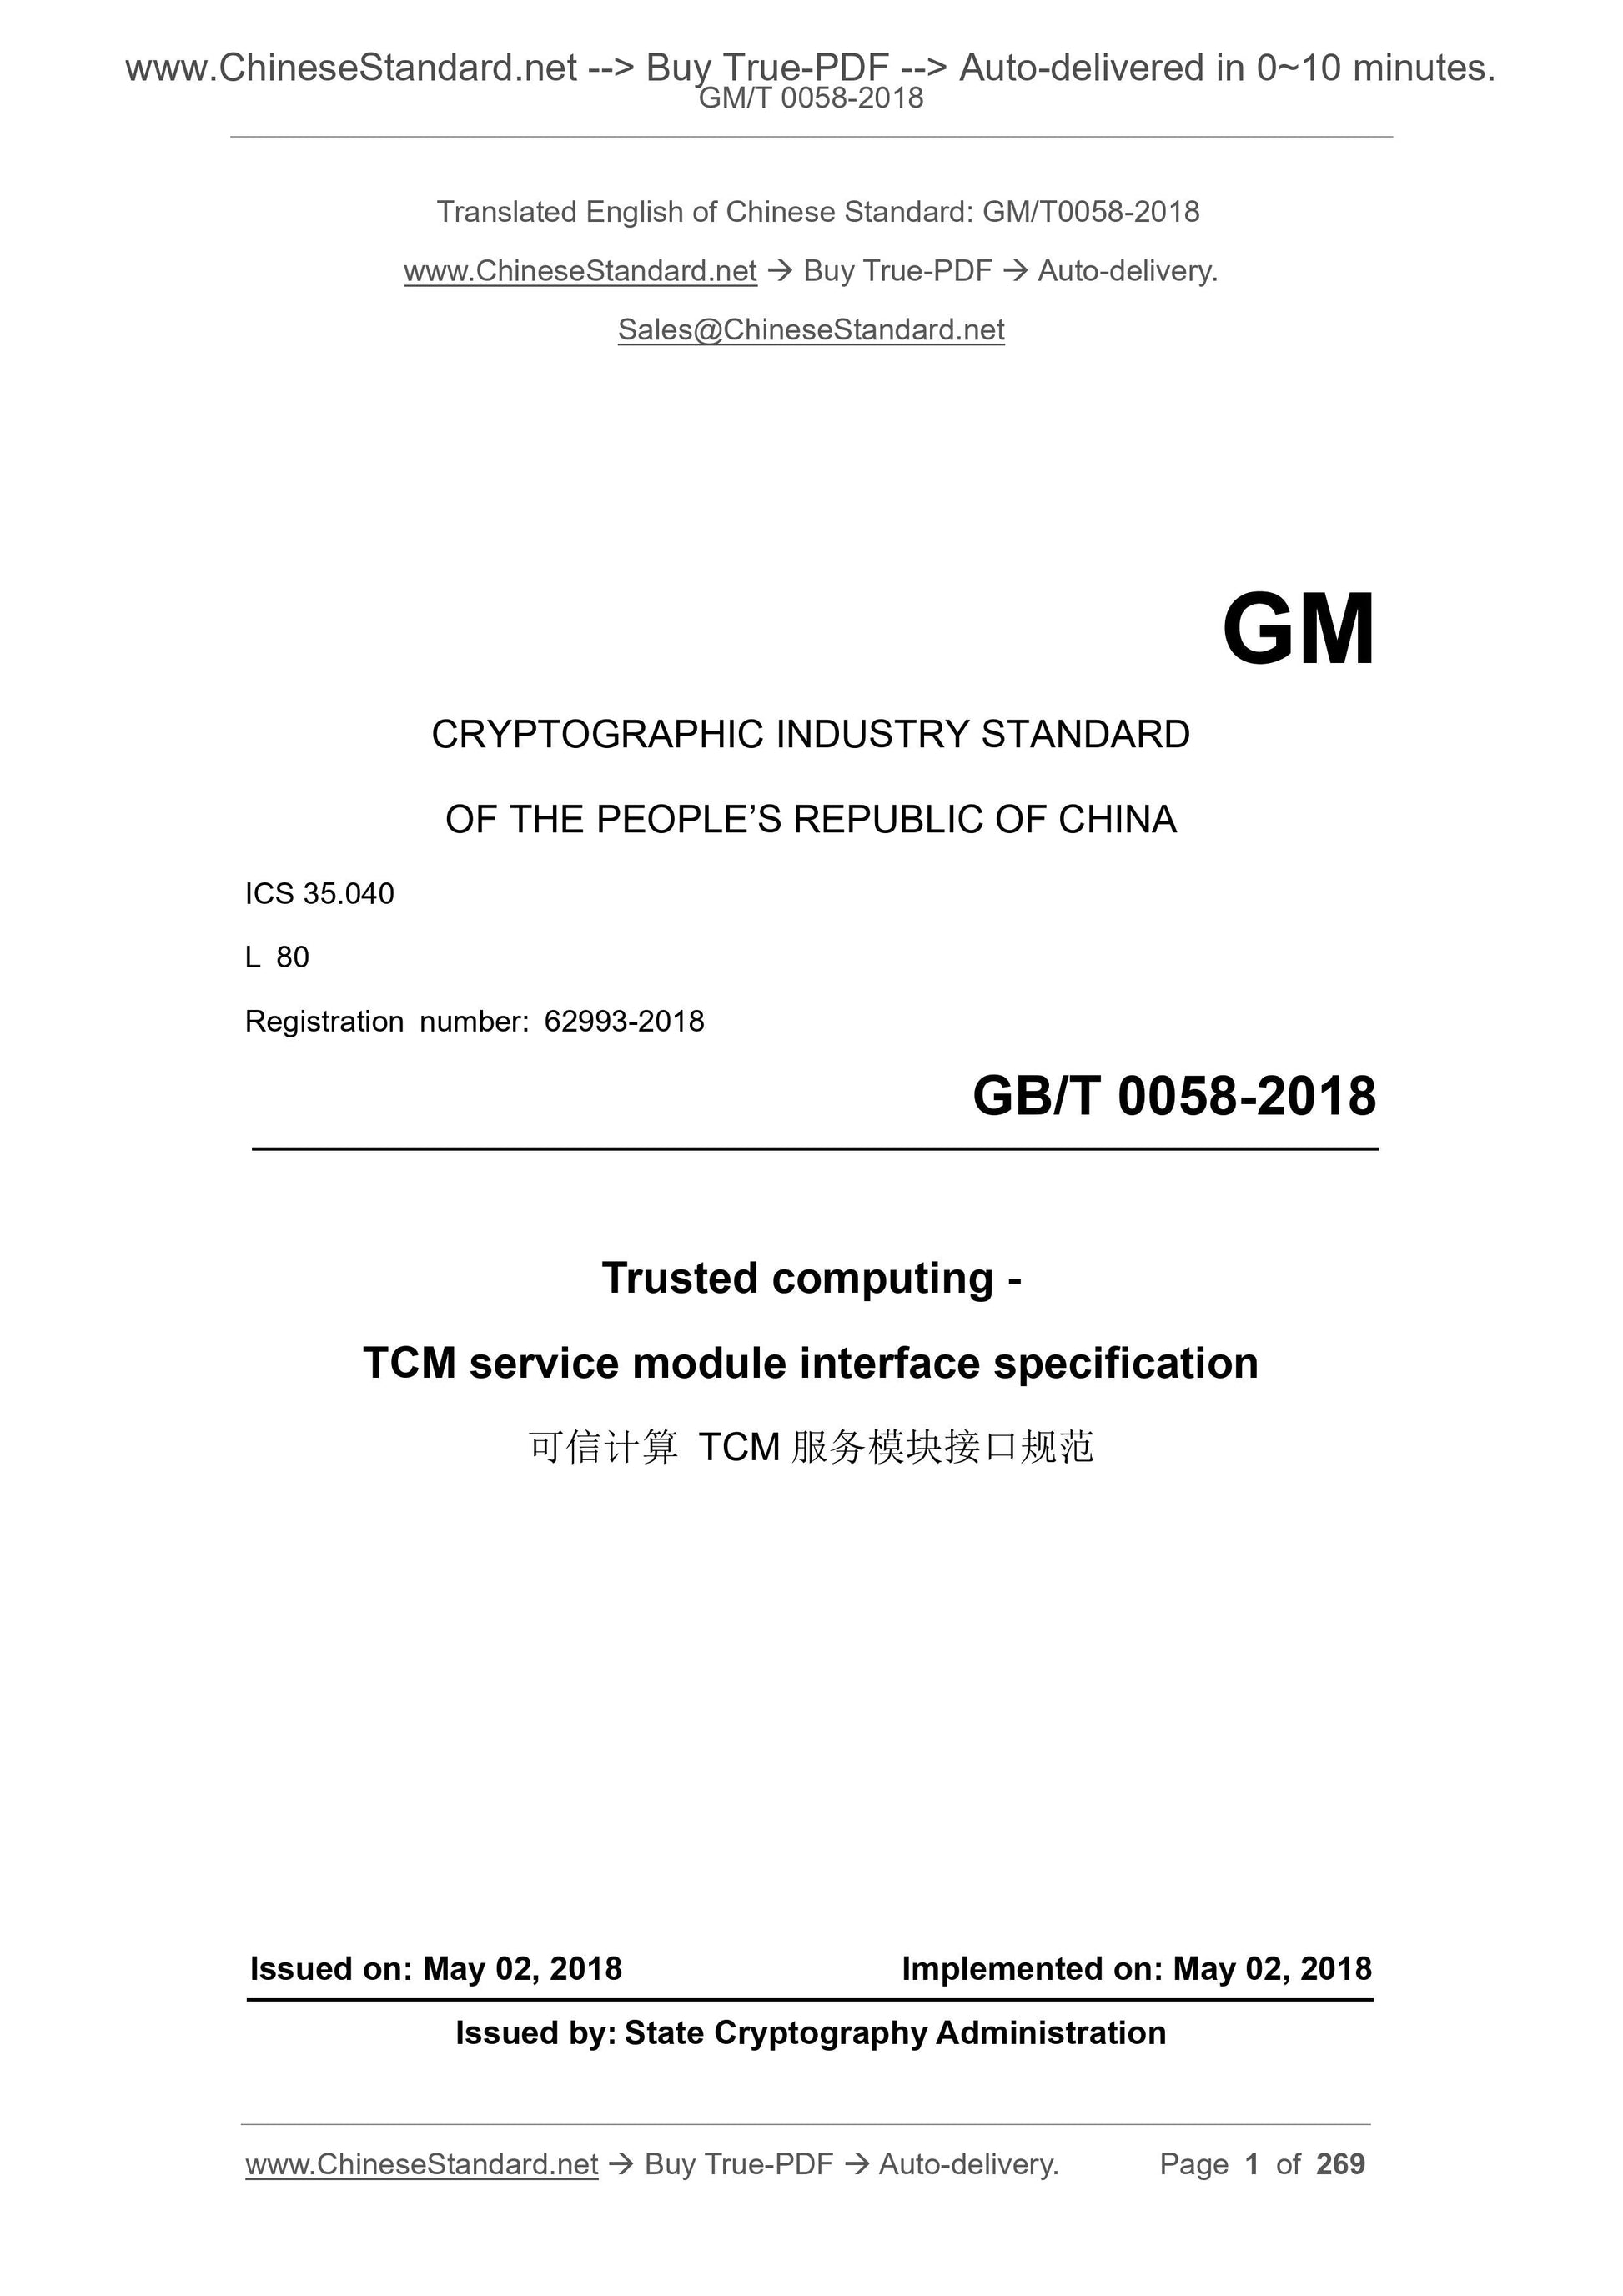 GM/T 0058-2018 Page 1